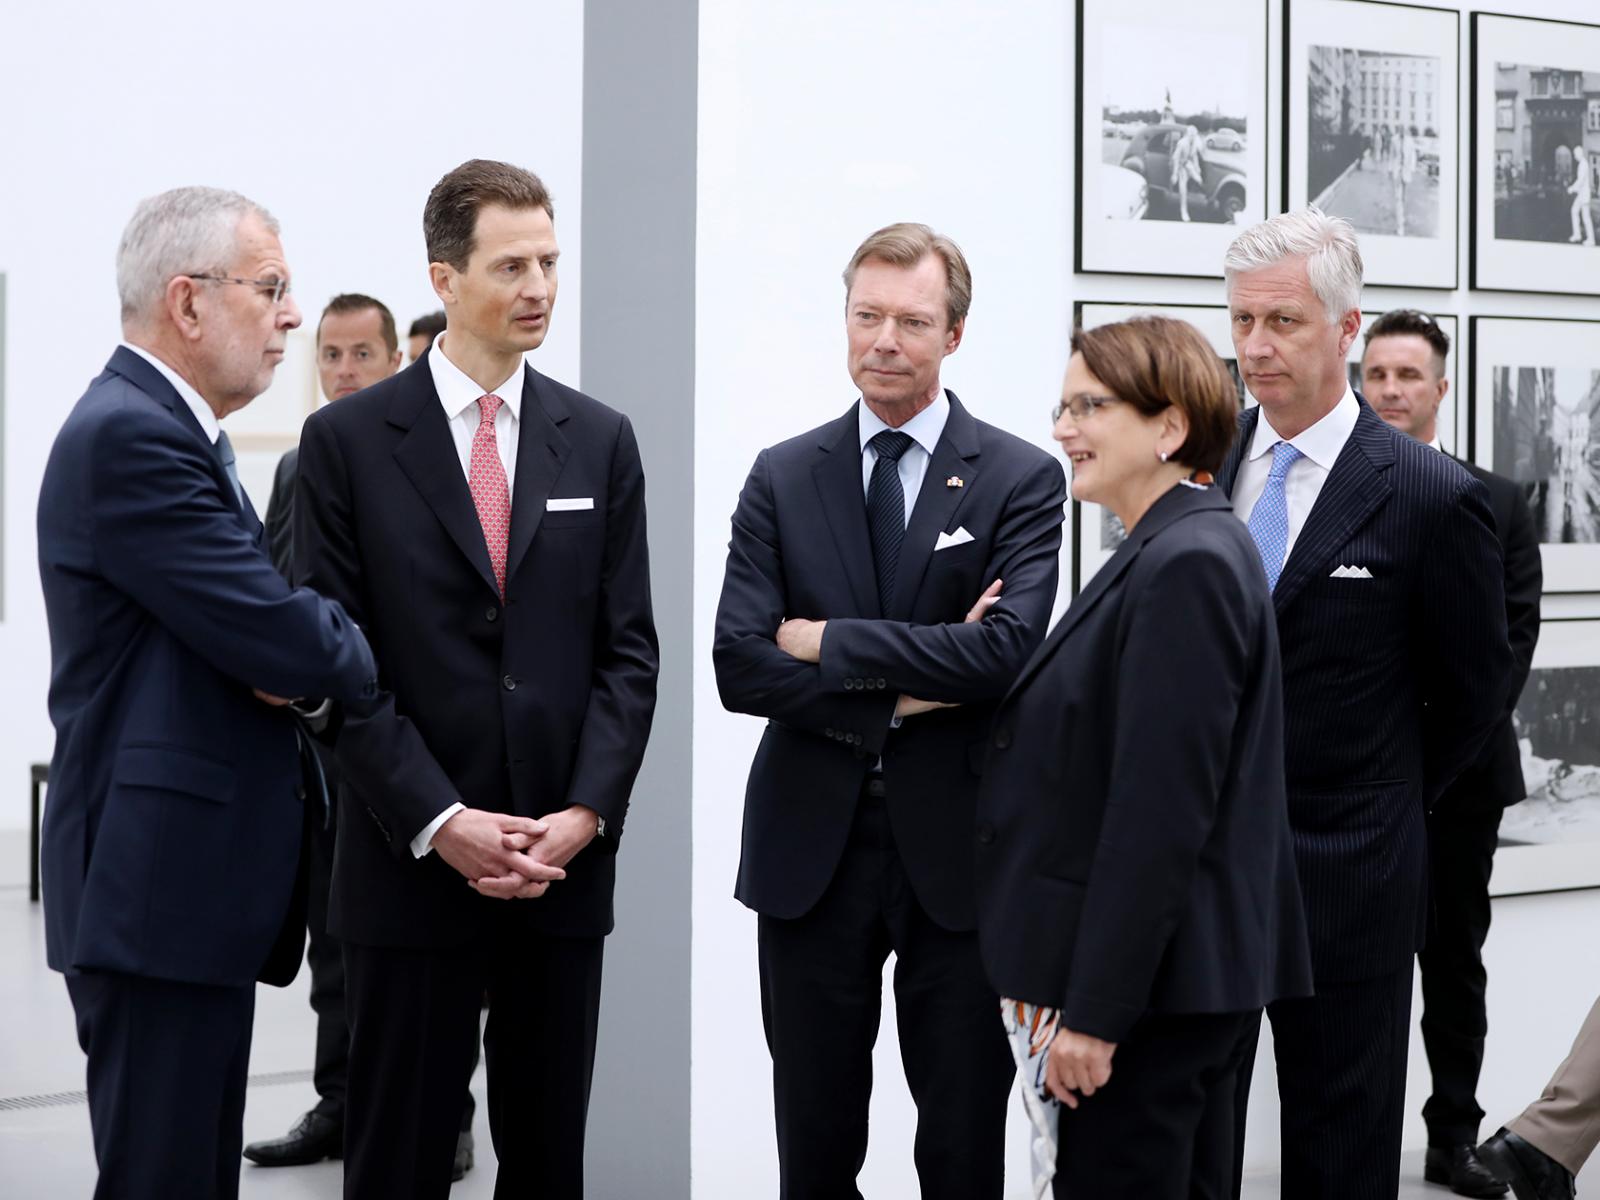 16th informal meeting of the Heads of State of the German-speaking countries